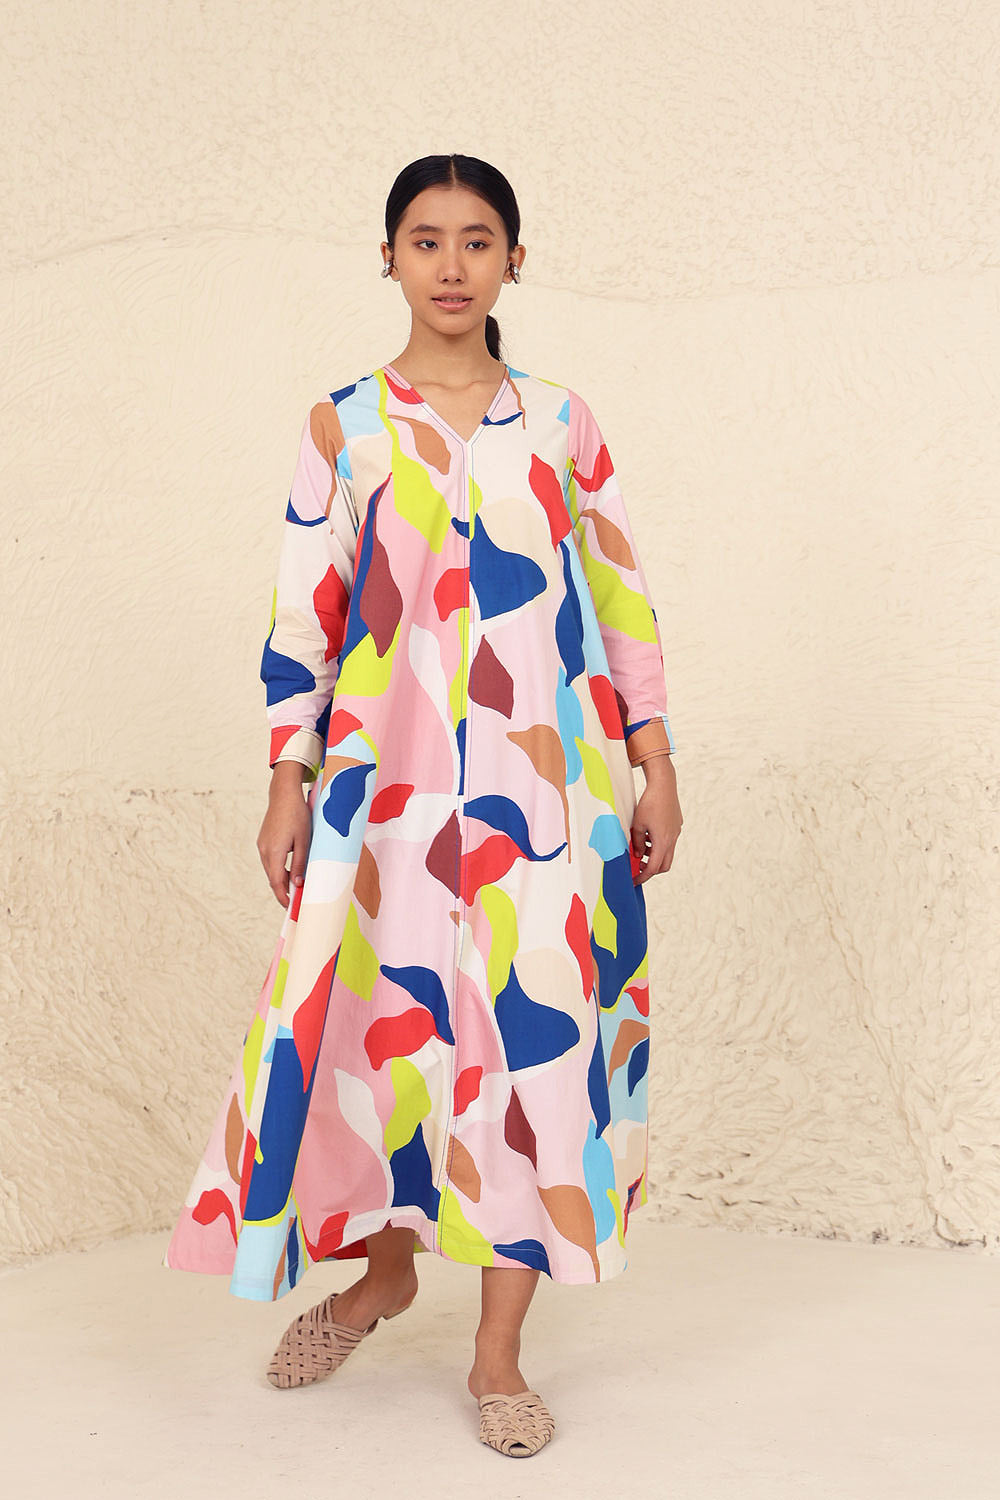 Multicolor Loose Fit Dress at Kamakhyaa by Kanelle. This item is Cotton Poplin, Evening Wear, Leafy Pattern, Made from Natural Materials, Midi Dresses, Multicolor, One by One by Kanelle, Relaxed Fit